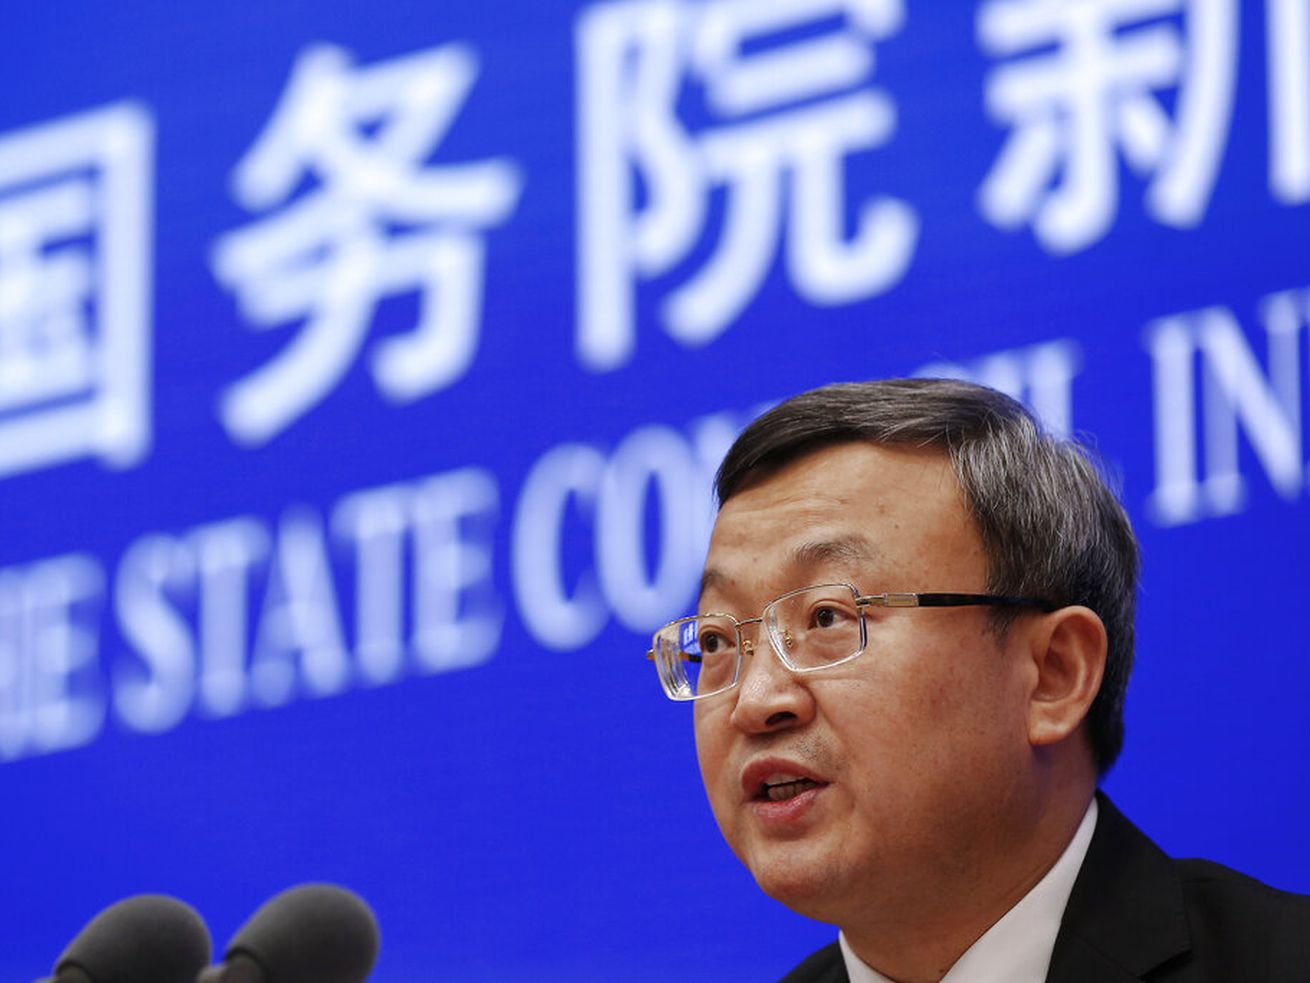 Chinese Vice Minister of Commerce Wang Shouwen speaks during a press conference about China-U.S. Trade issues at the State Council Information Office in Beijing, Sunday, June 2, 2019. China issued a report blaming the United States for a trade dispute and says it won’t back down on “major issues of principle.” 